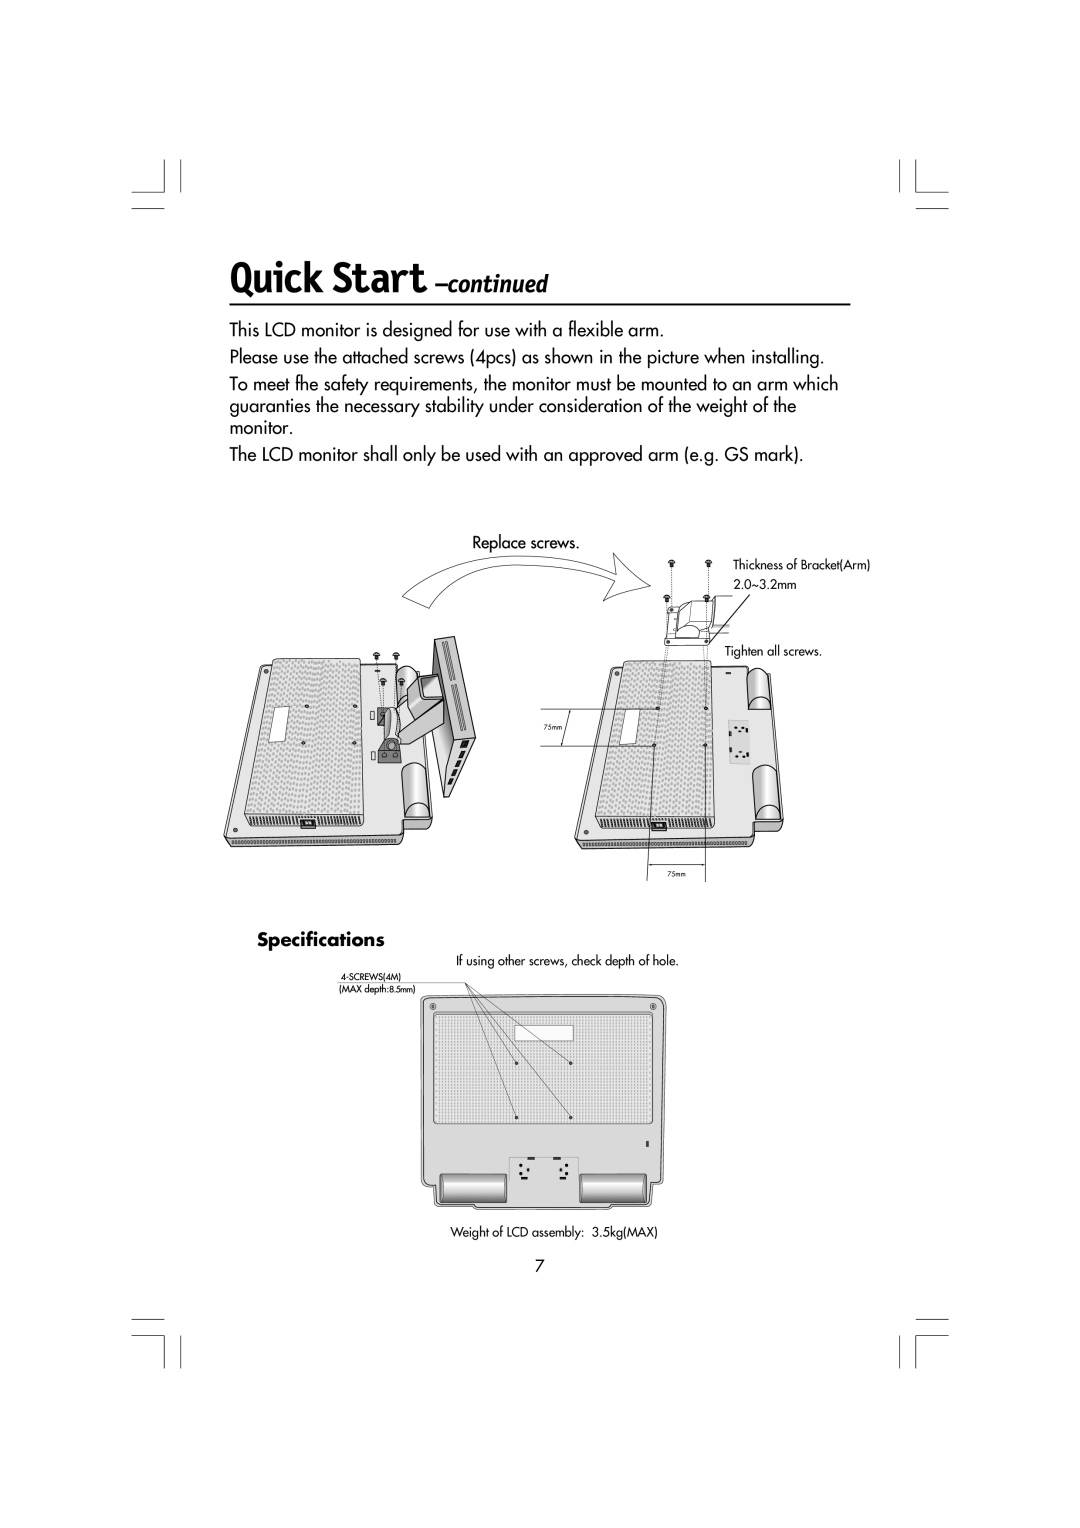 Mitsubishi Electronics LCD1560M manual Specifications, Quick Start -continued 